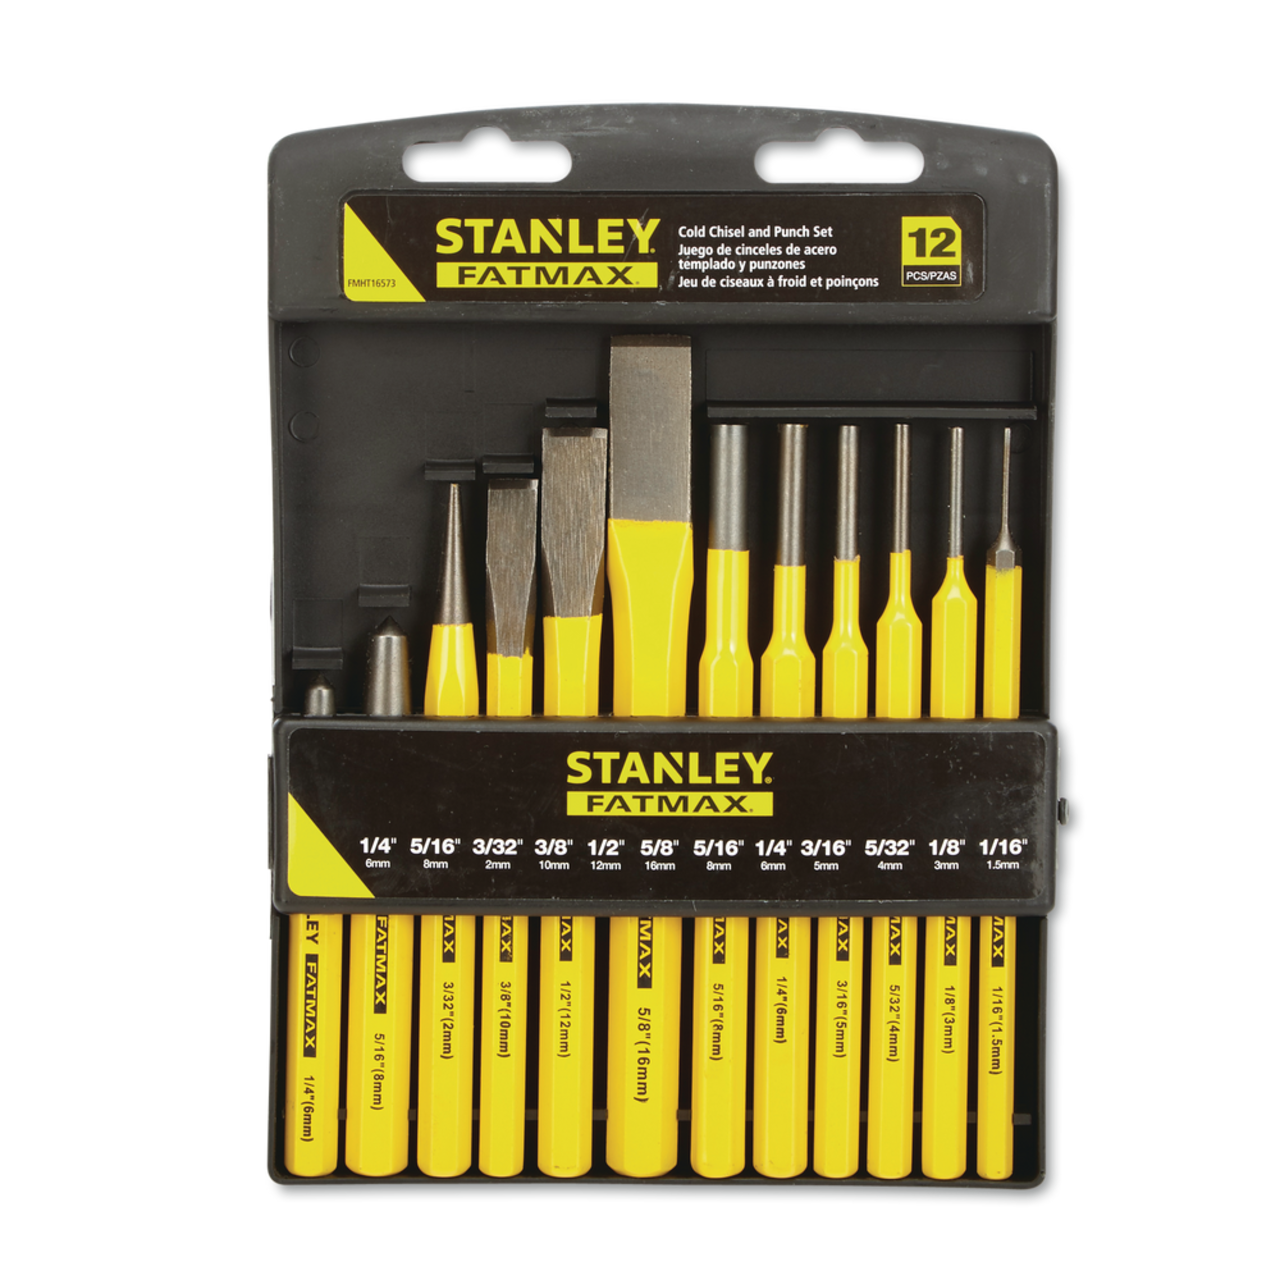 https://media-www.canadiantire.ca/product/fixing/tools/manual-fastening/0581600/stanley-12-piece-punch-and-chisel-set-7ae84de0-2551-4546-b310-27d6e1a938ce.png?imdensity=1&imwidth=640&impolicy=mZoom